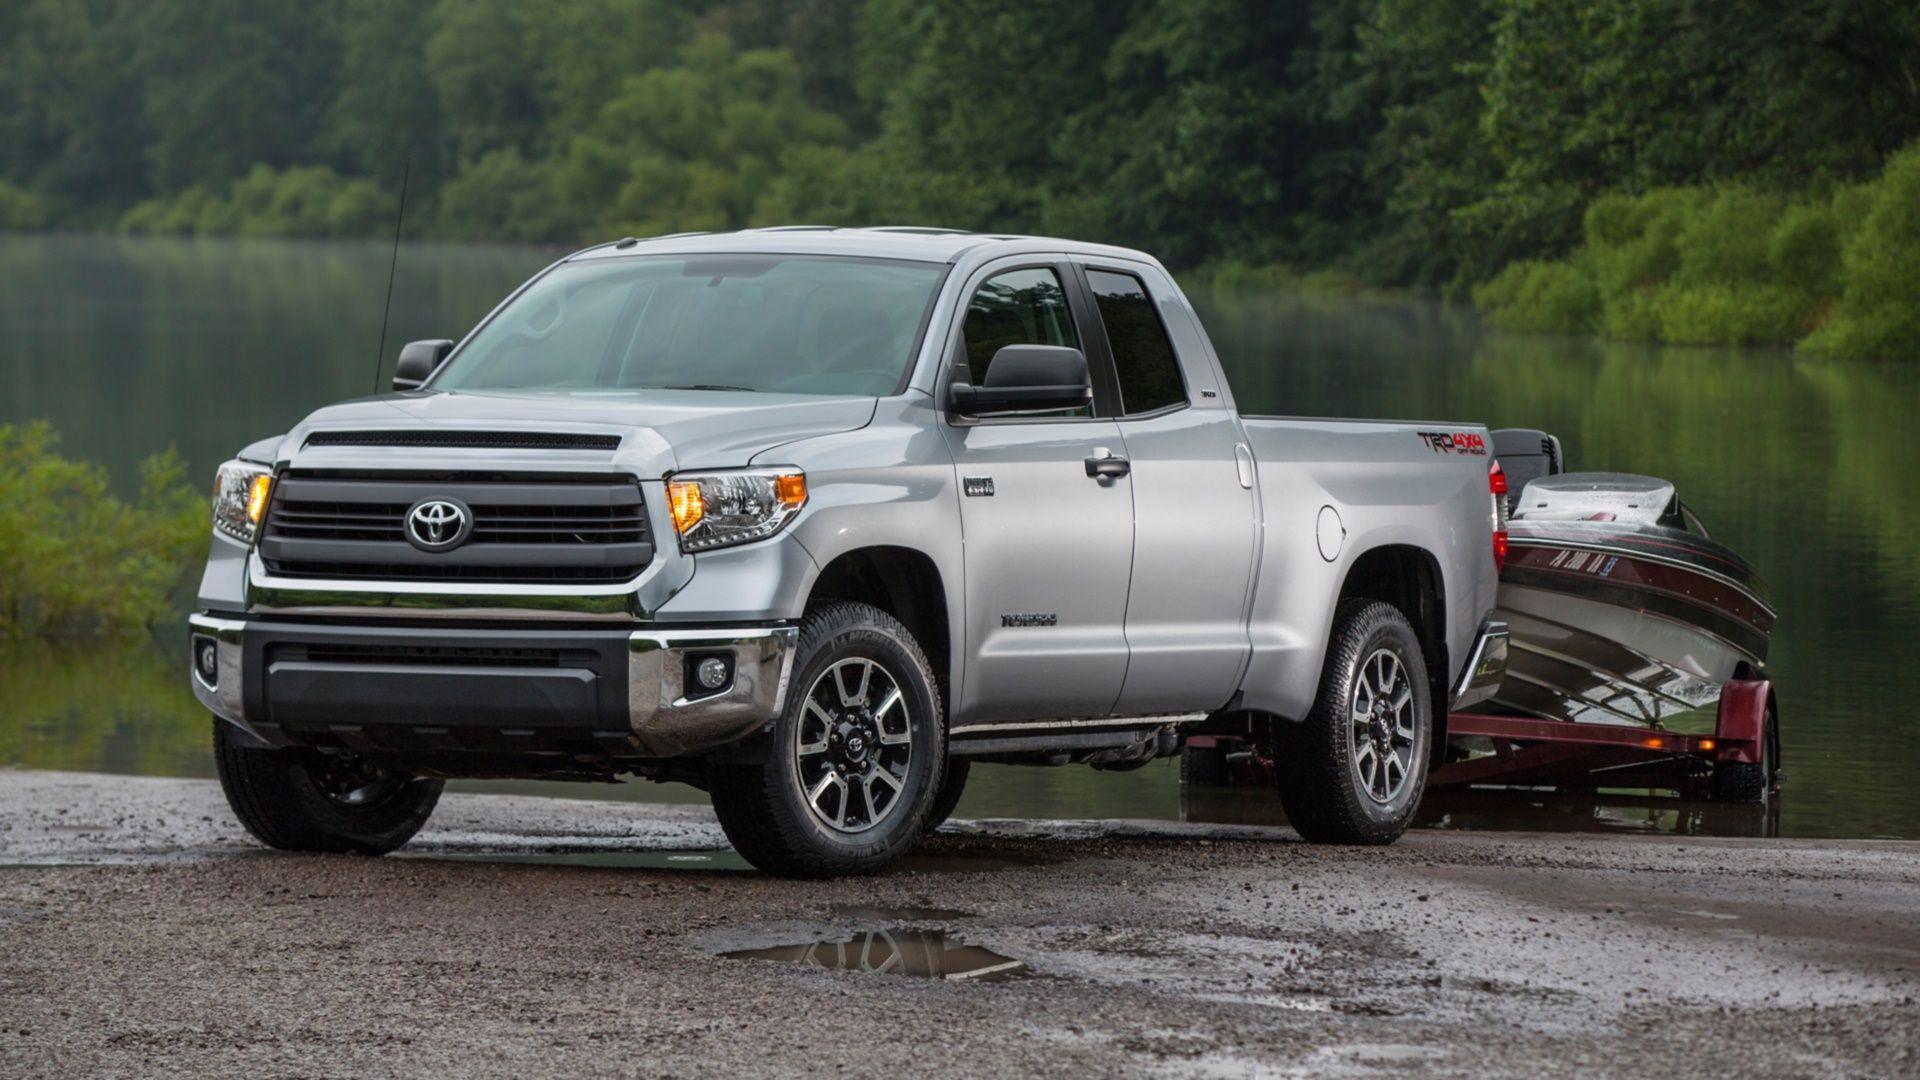 Toyota Tundra Full HD Wallpaper and Background Imagex1080